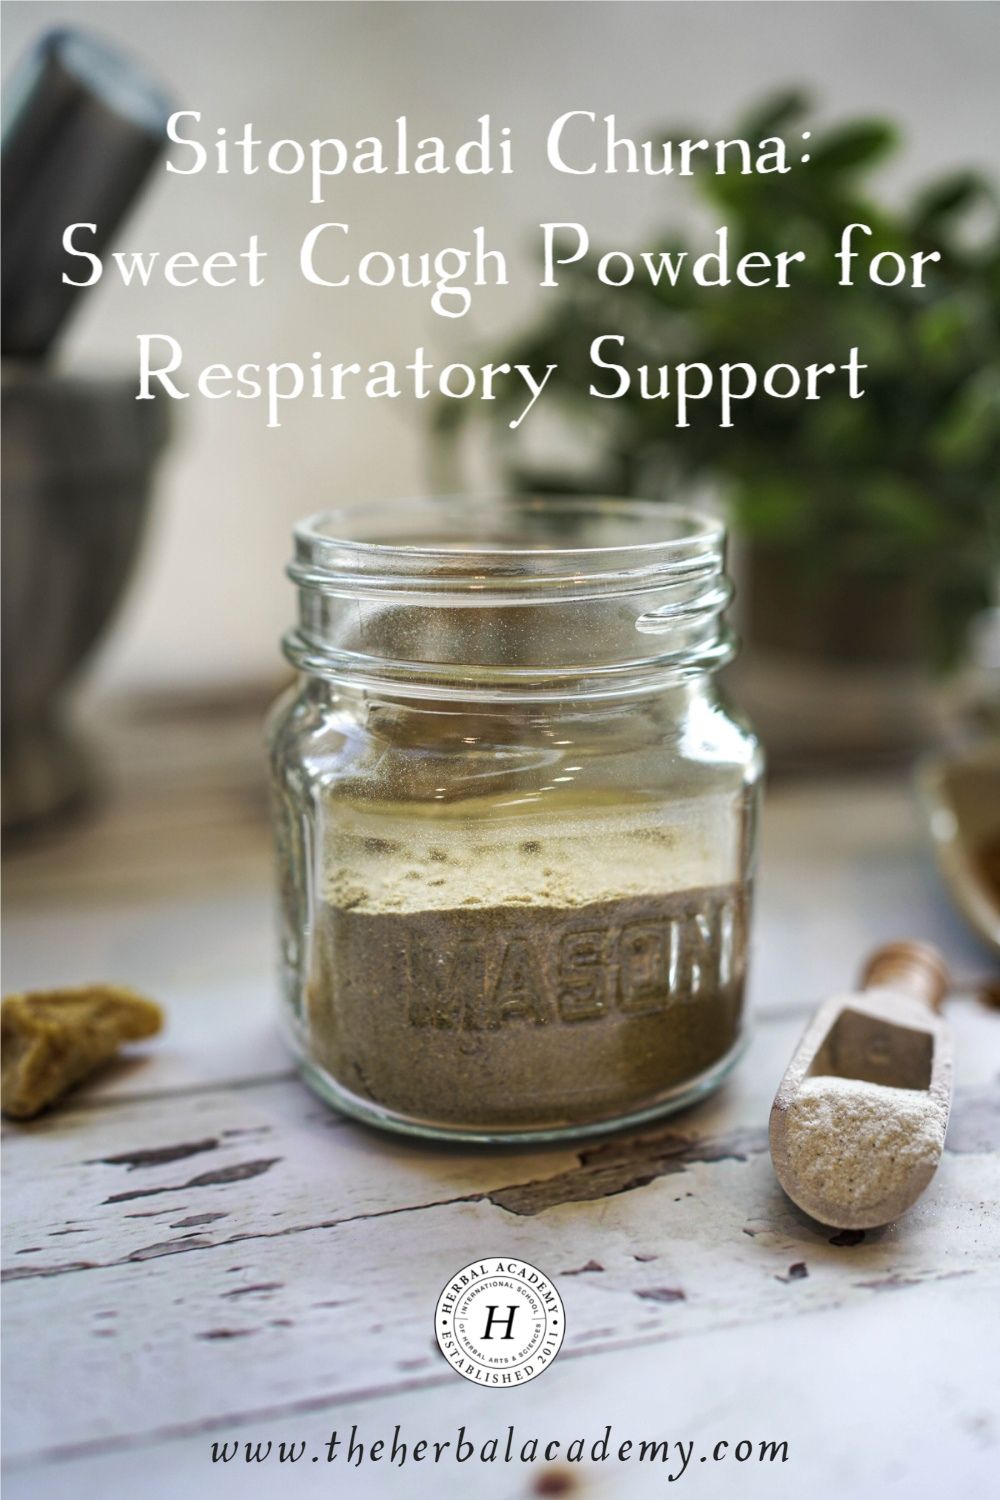 Sitopaladi Churna: Sweet Cough Powder for Respiratory Support | Herbal Academy | Whether you mix up a batch yourself or buy some ready-made, sitopaladi churna may become a household favorite for allergy and cold season!